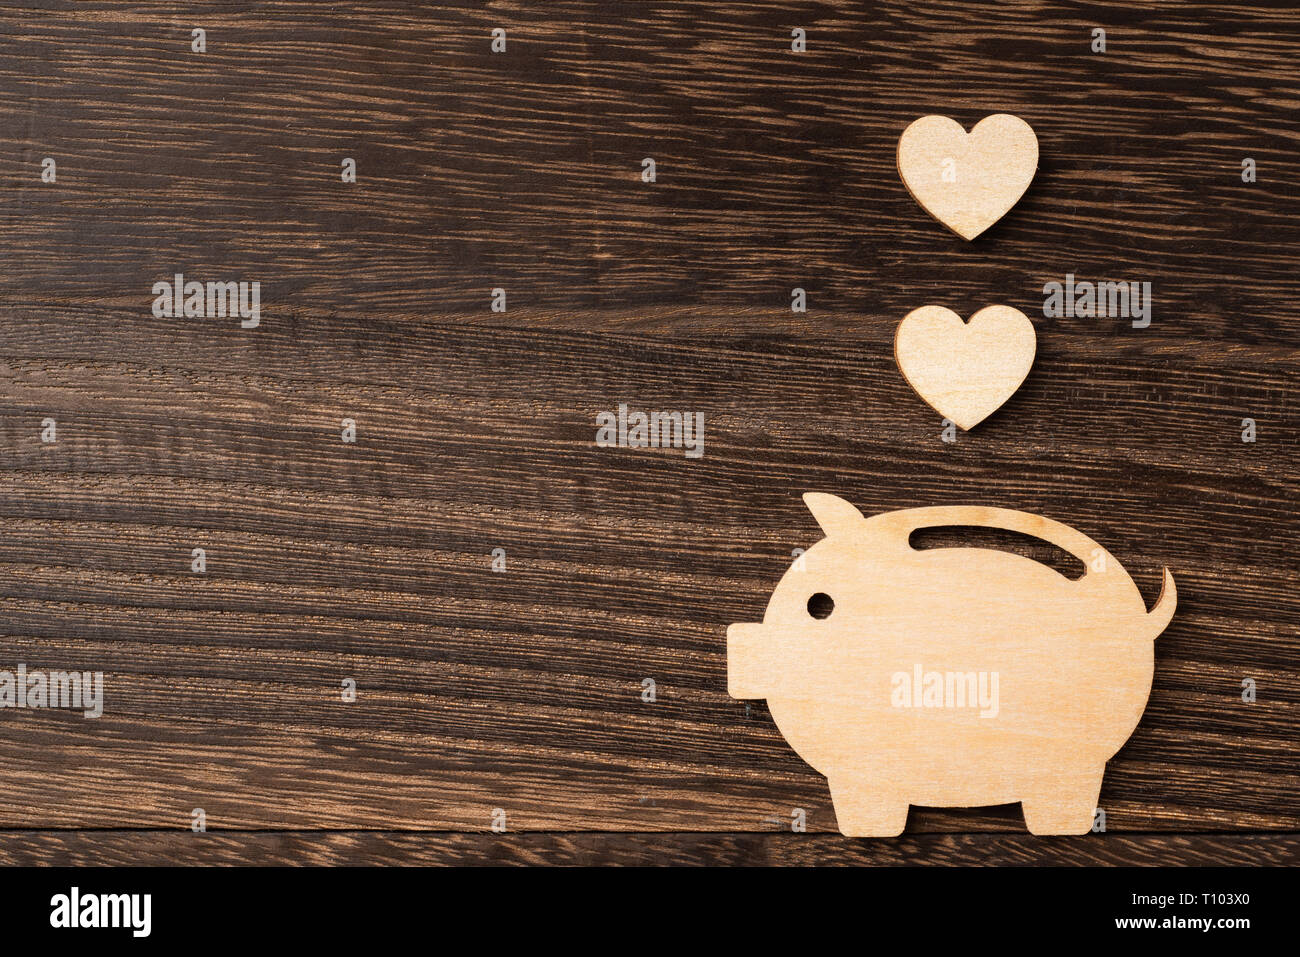 financial and design concept - wooden moneybox pig piece on dark wood background. it's saving, investing concept Stock Photo